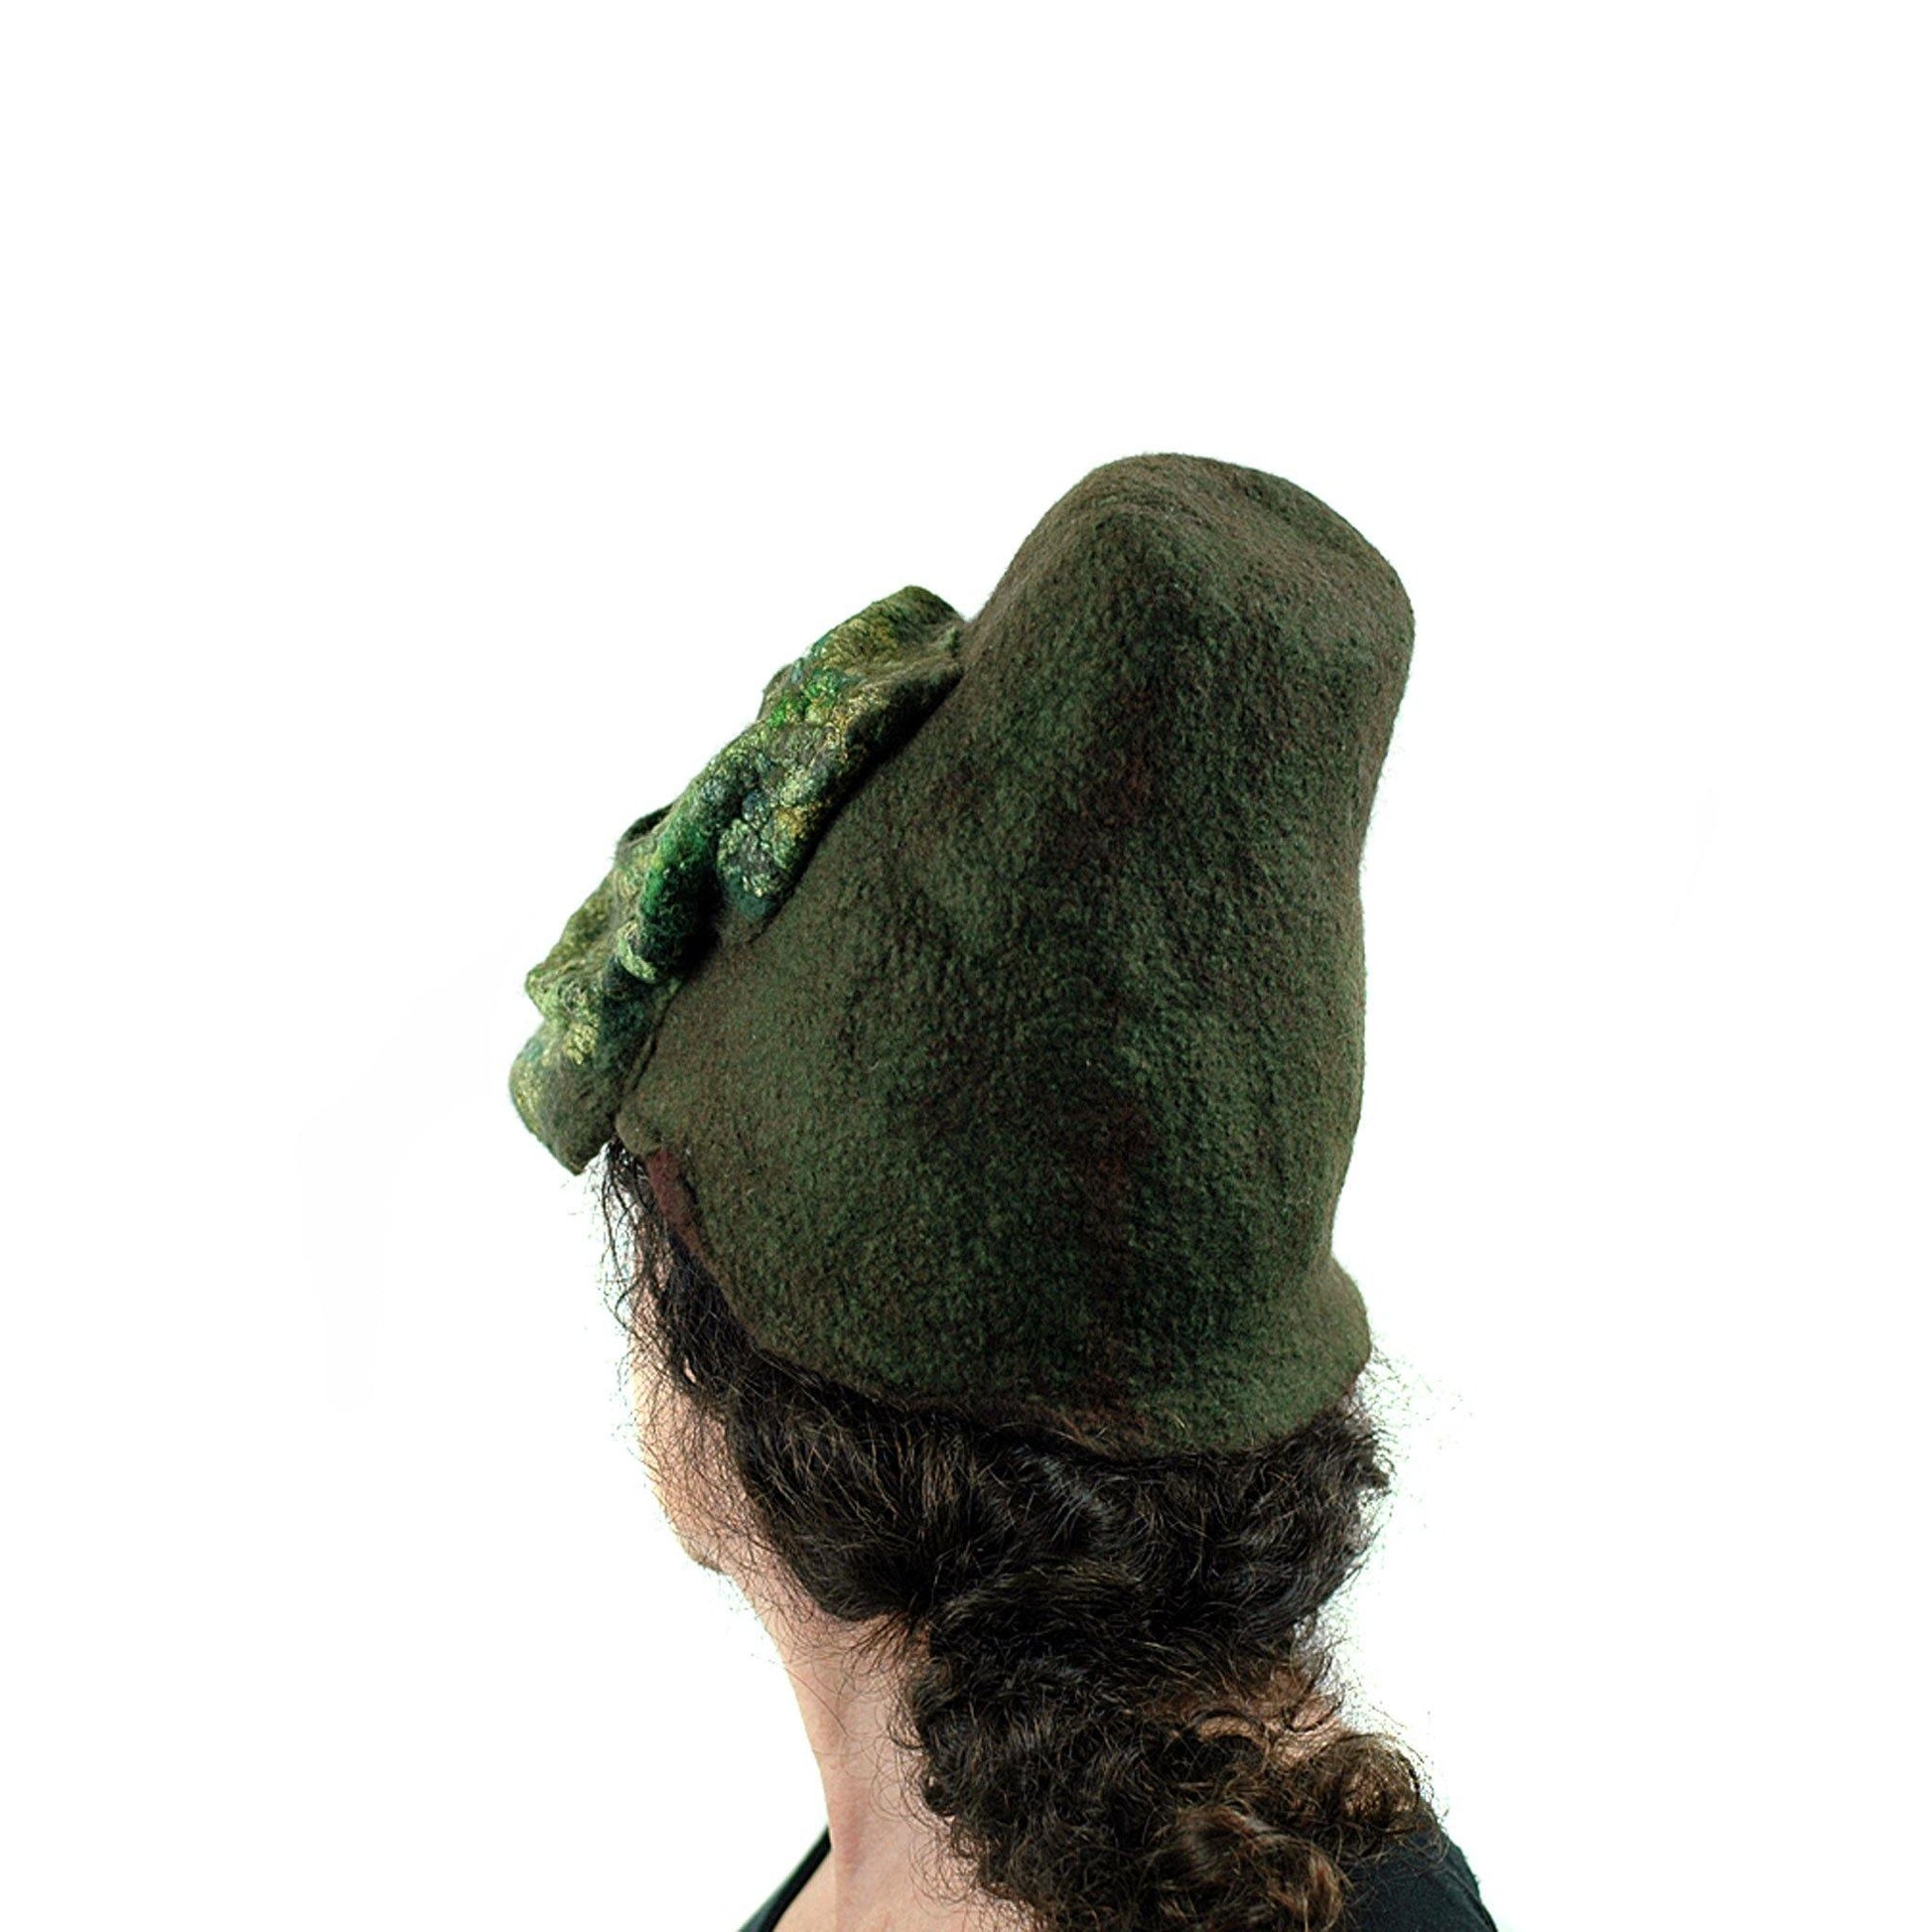 Mossy Forest Felted Fez - back view